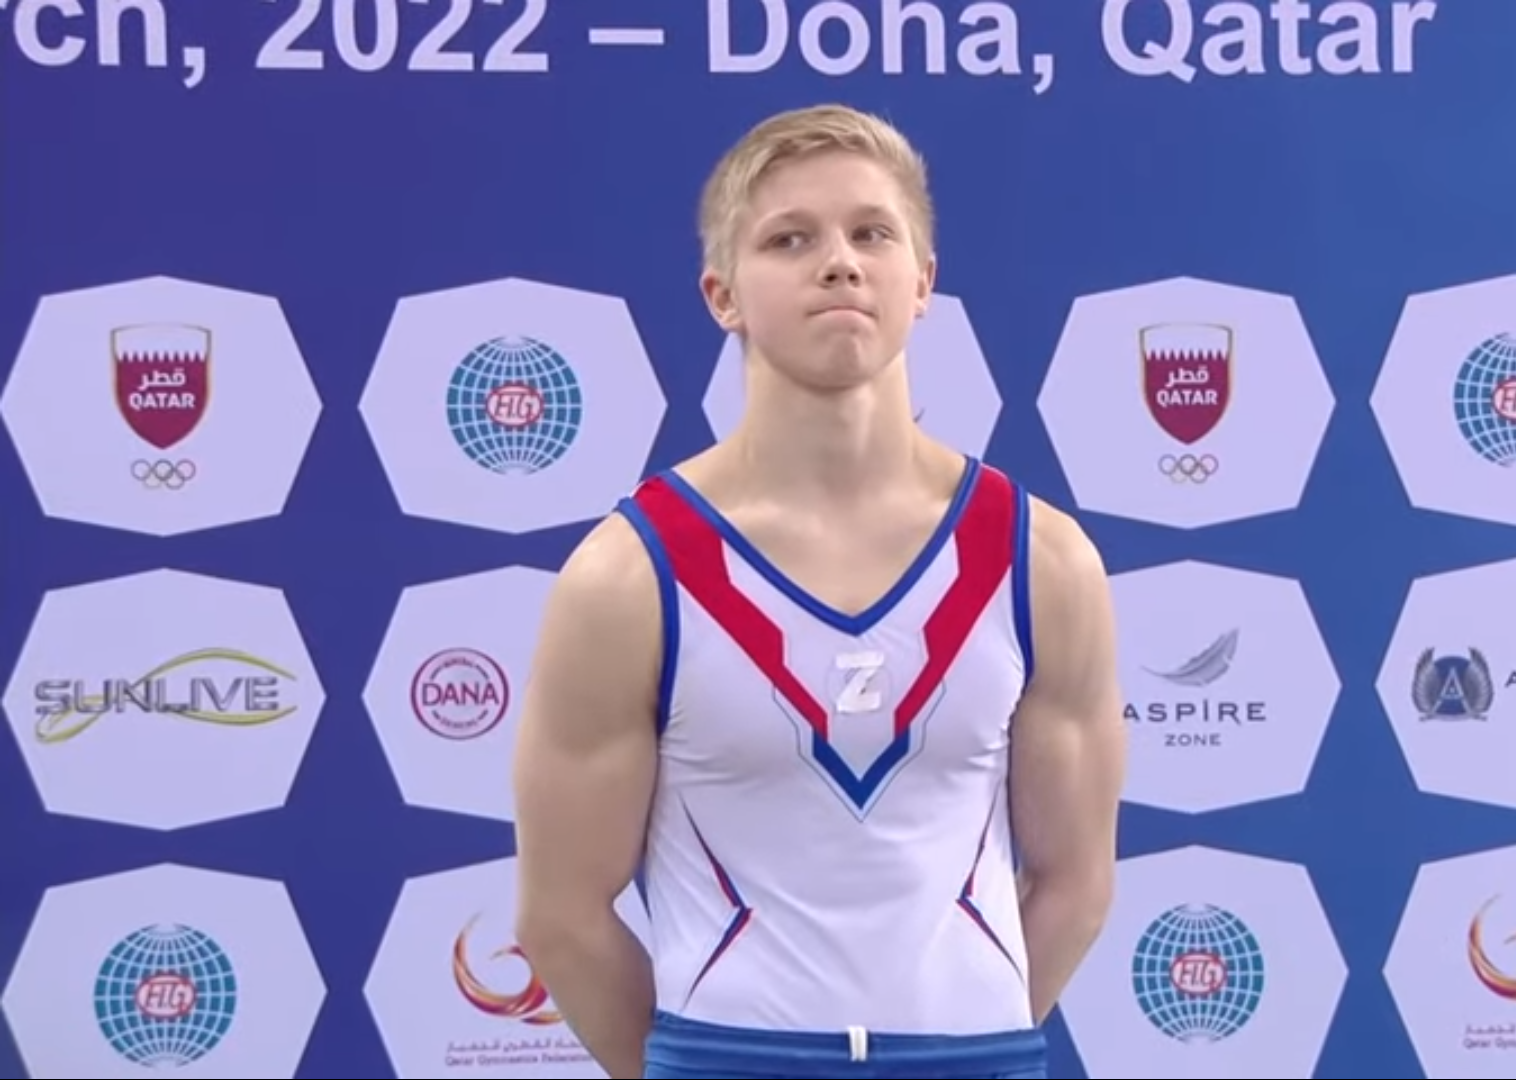 Kaluga Governor Vladislav Shapsha has said he will pay Ivan Kuliak's legal fees after he was fined for wearing the "Z" symbol at a FiG World Cup event in Doha last March ©YouTube